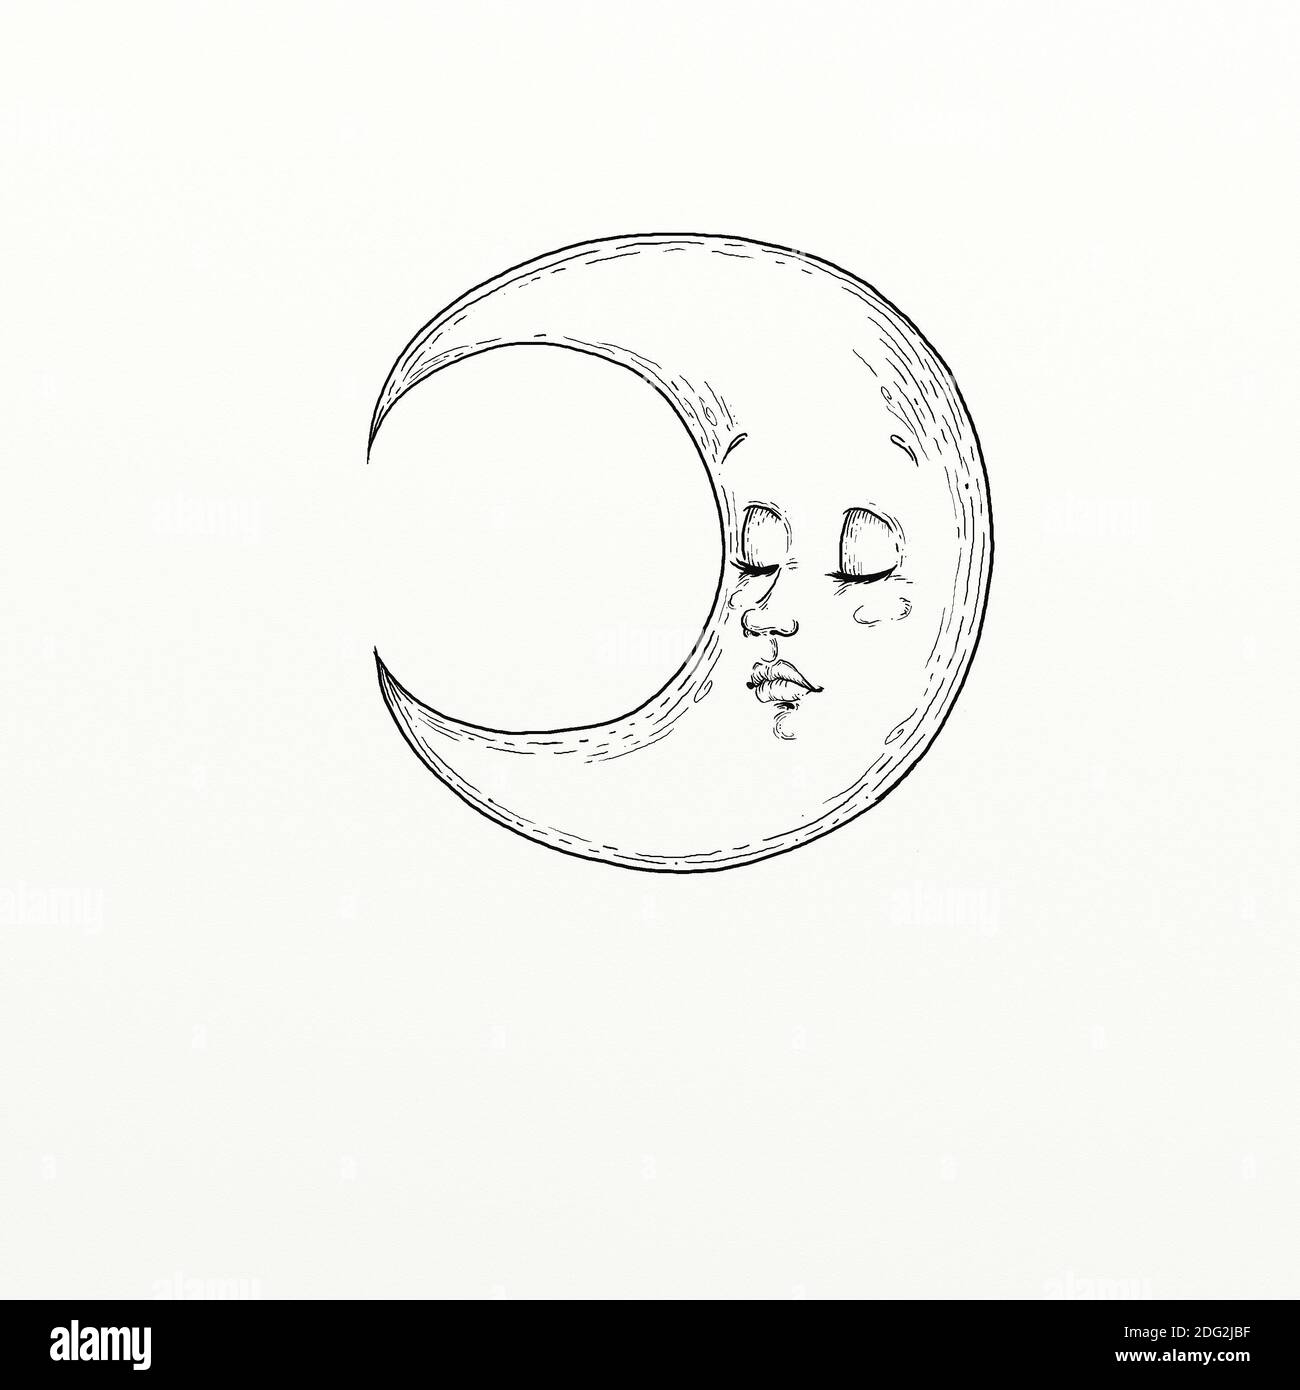 black and white hand designed illustration depicting a sleeping moon Stock Photo